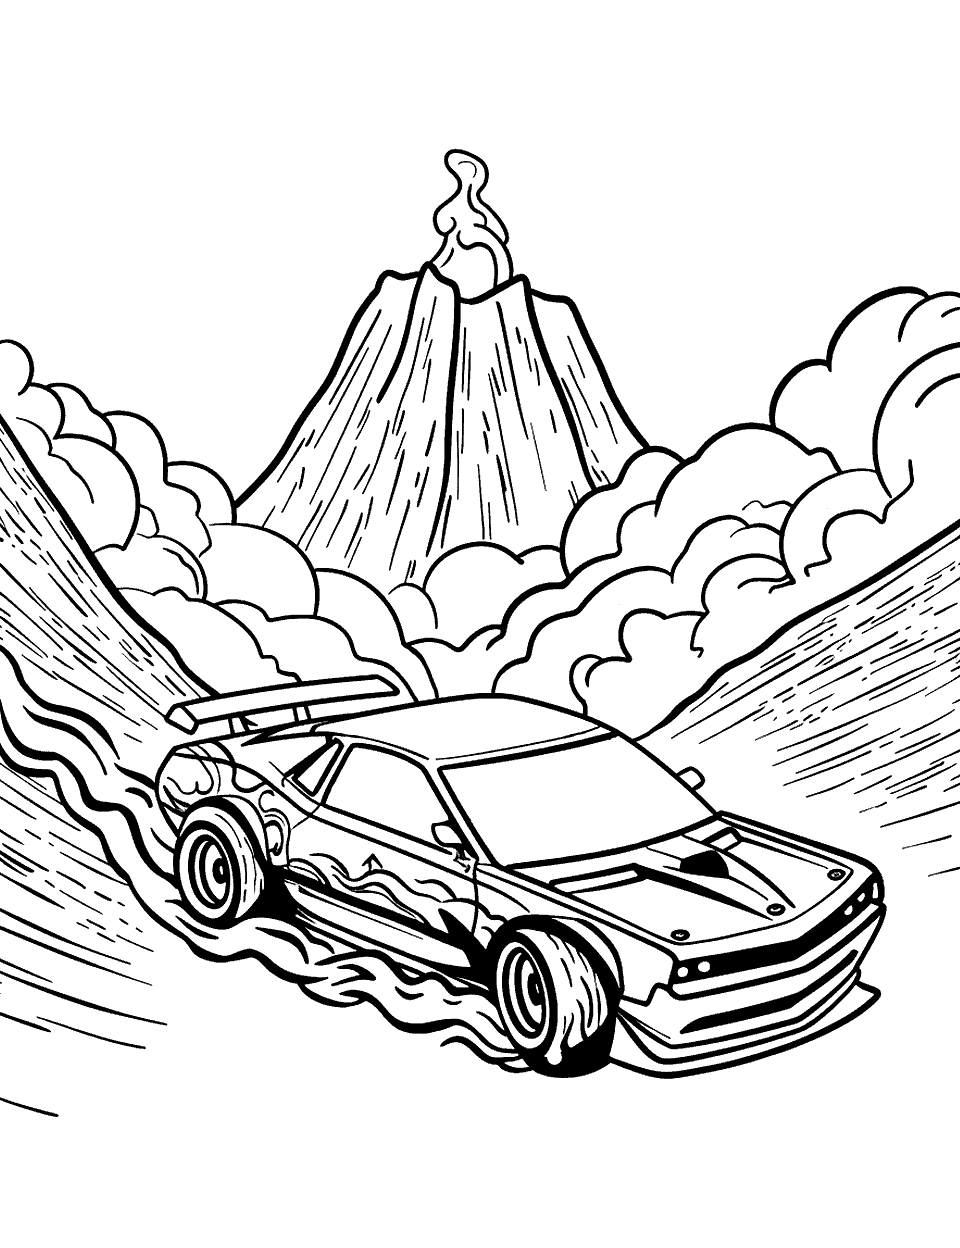 Volcano Lava Escape Coloring Page - A Hot Wheels car racing away from an erupting volcano, lava flowing behind it.